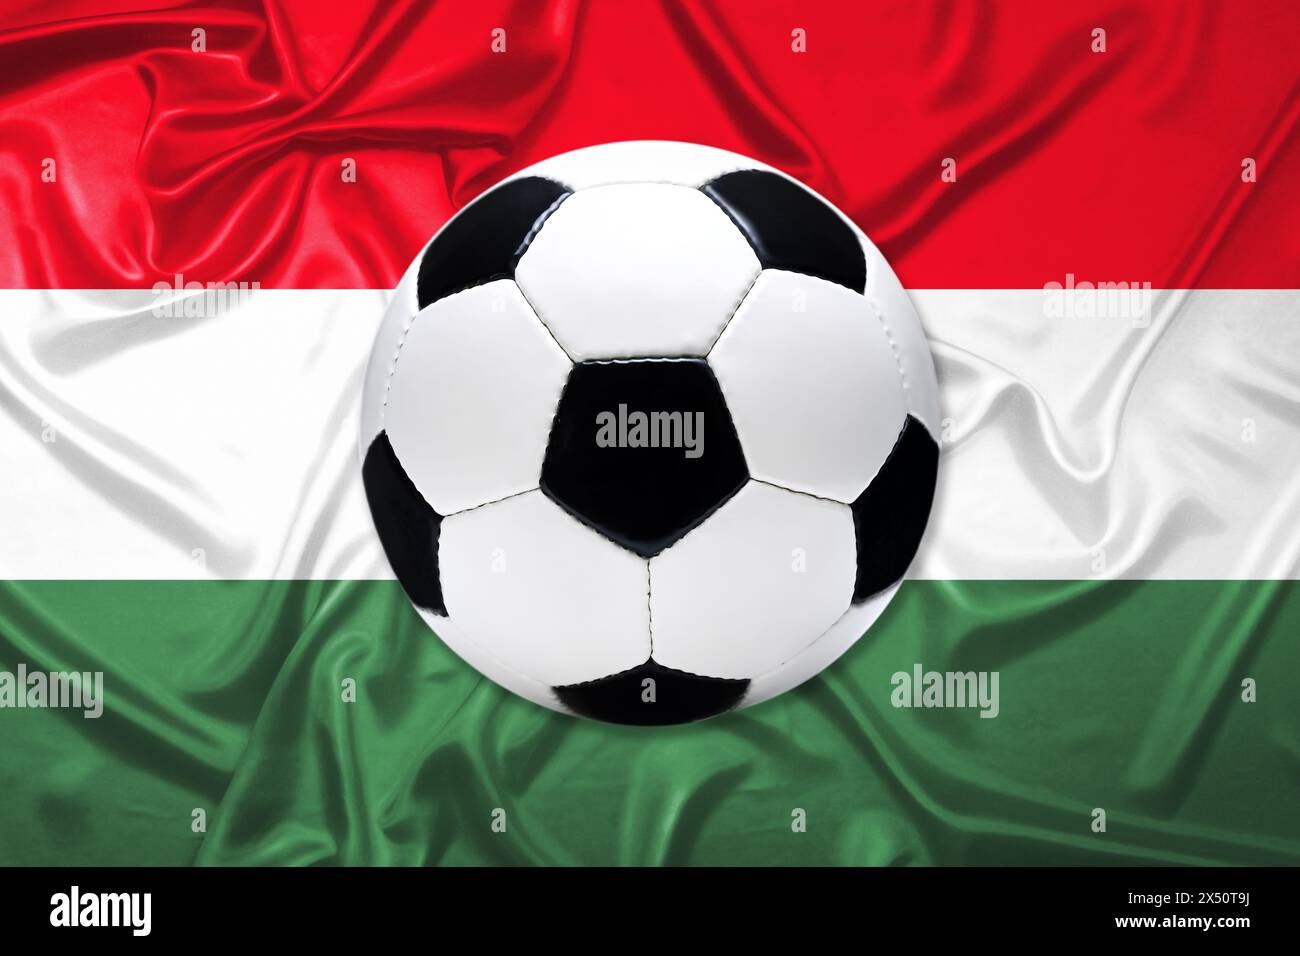 Black and white leather football with flag of Hungary Stock Photo